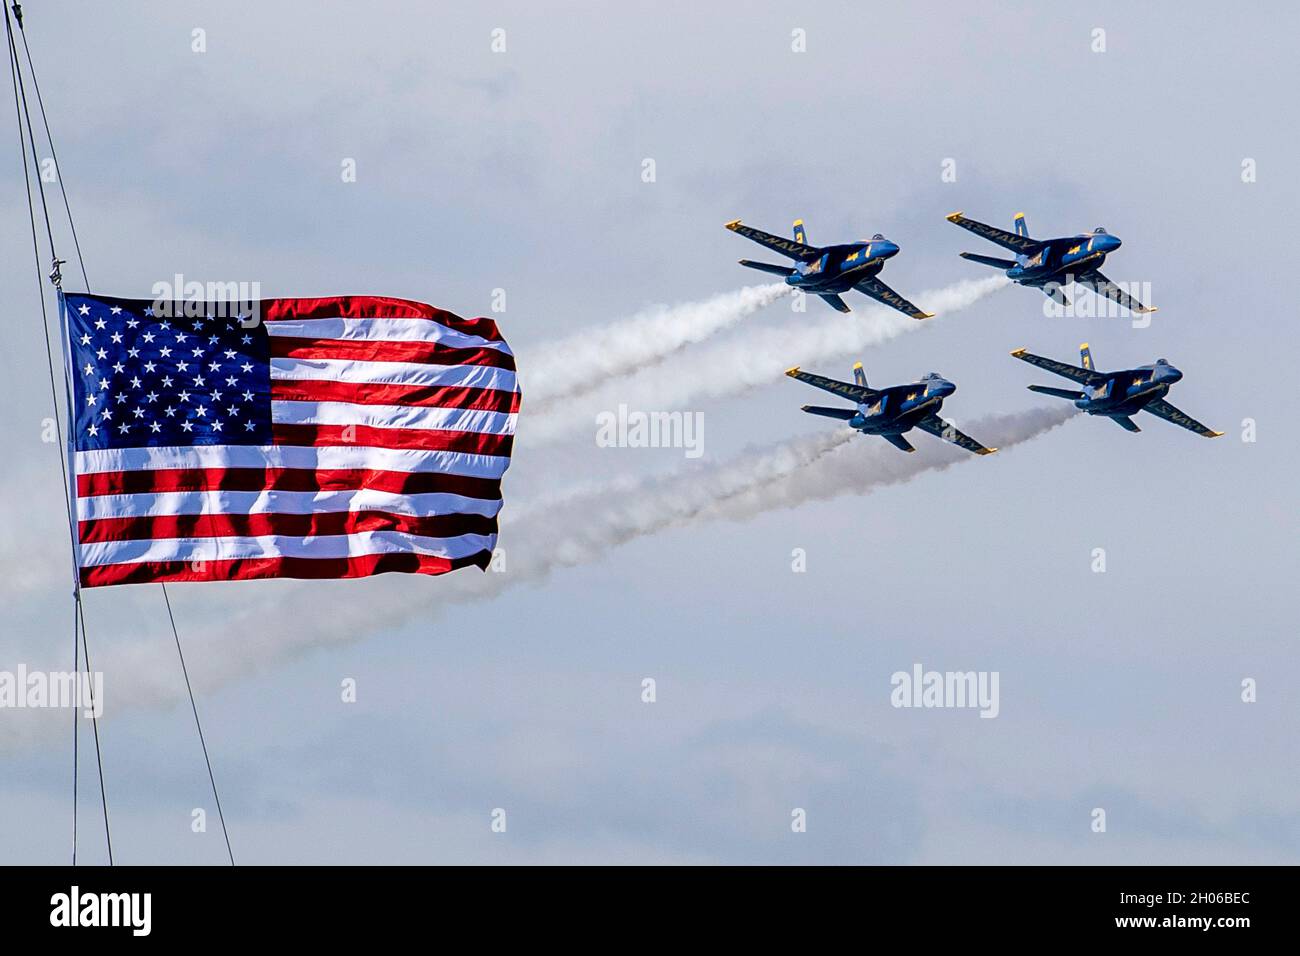 San Francisco, United States. 09th Oct, 2021. The U.S. Navy Flight Demonstration Squadron, the Blue Angels fly past in formation in F/A-18F Super Hornet jet fighters during San Francisco Fleet Week 2021 October 9, 2021 in San Francisco, California. Credit: MC2 Hector Carrera/U.S. Navy/Alamy Live News Stock Photo